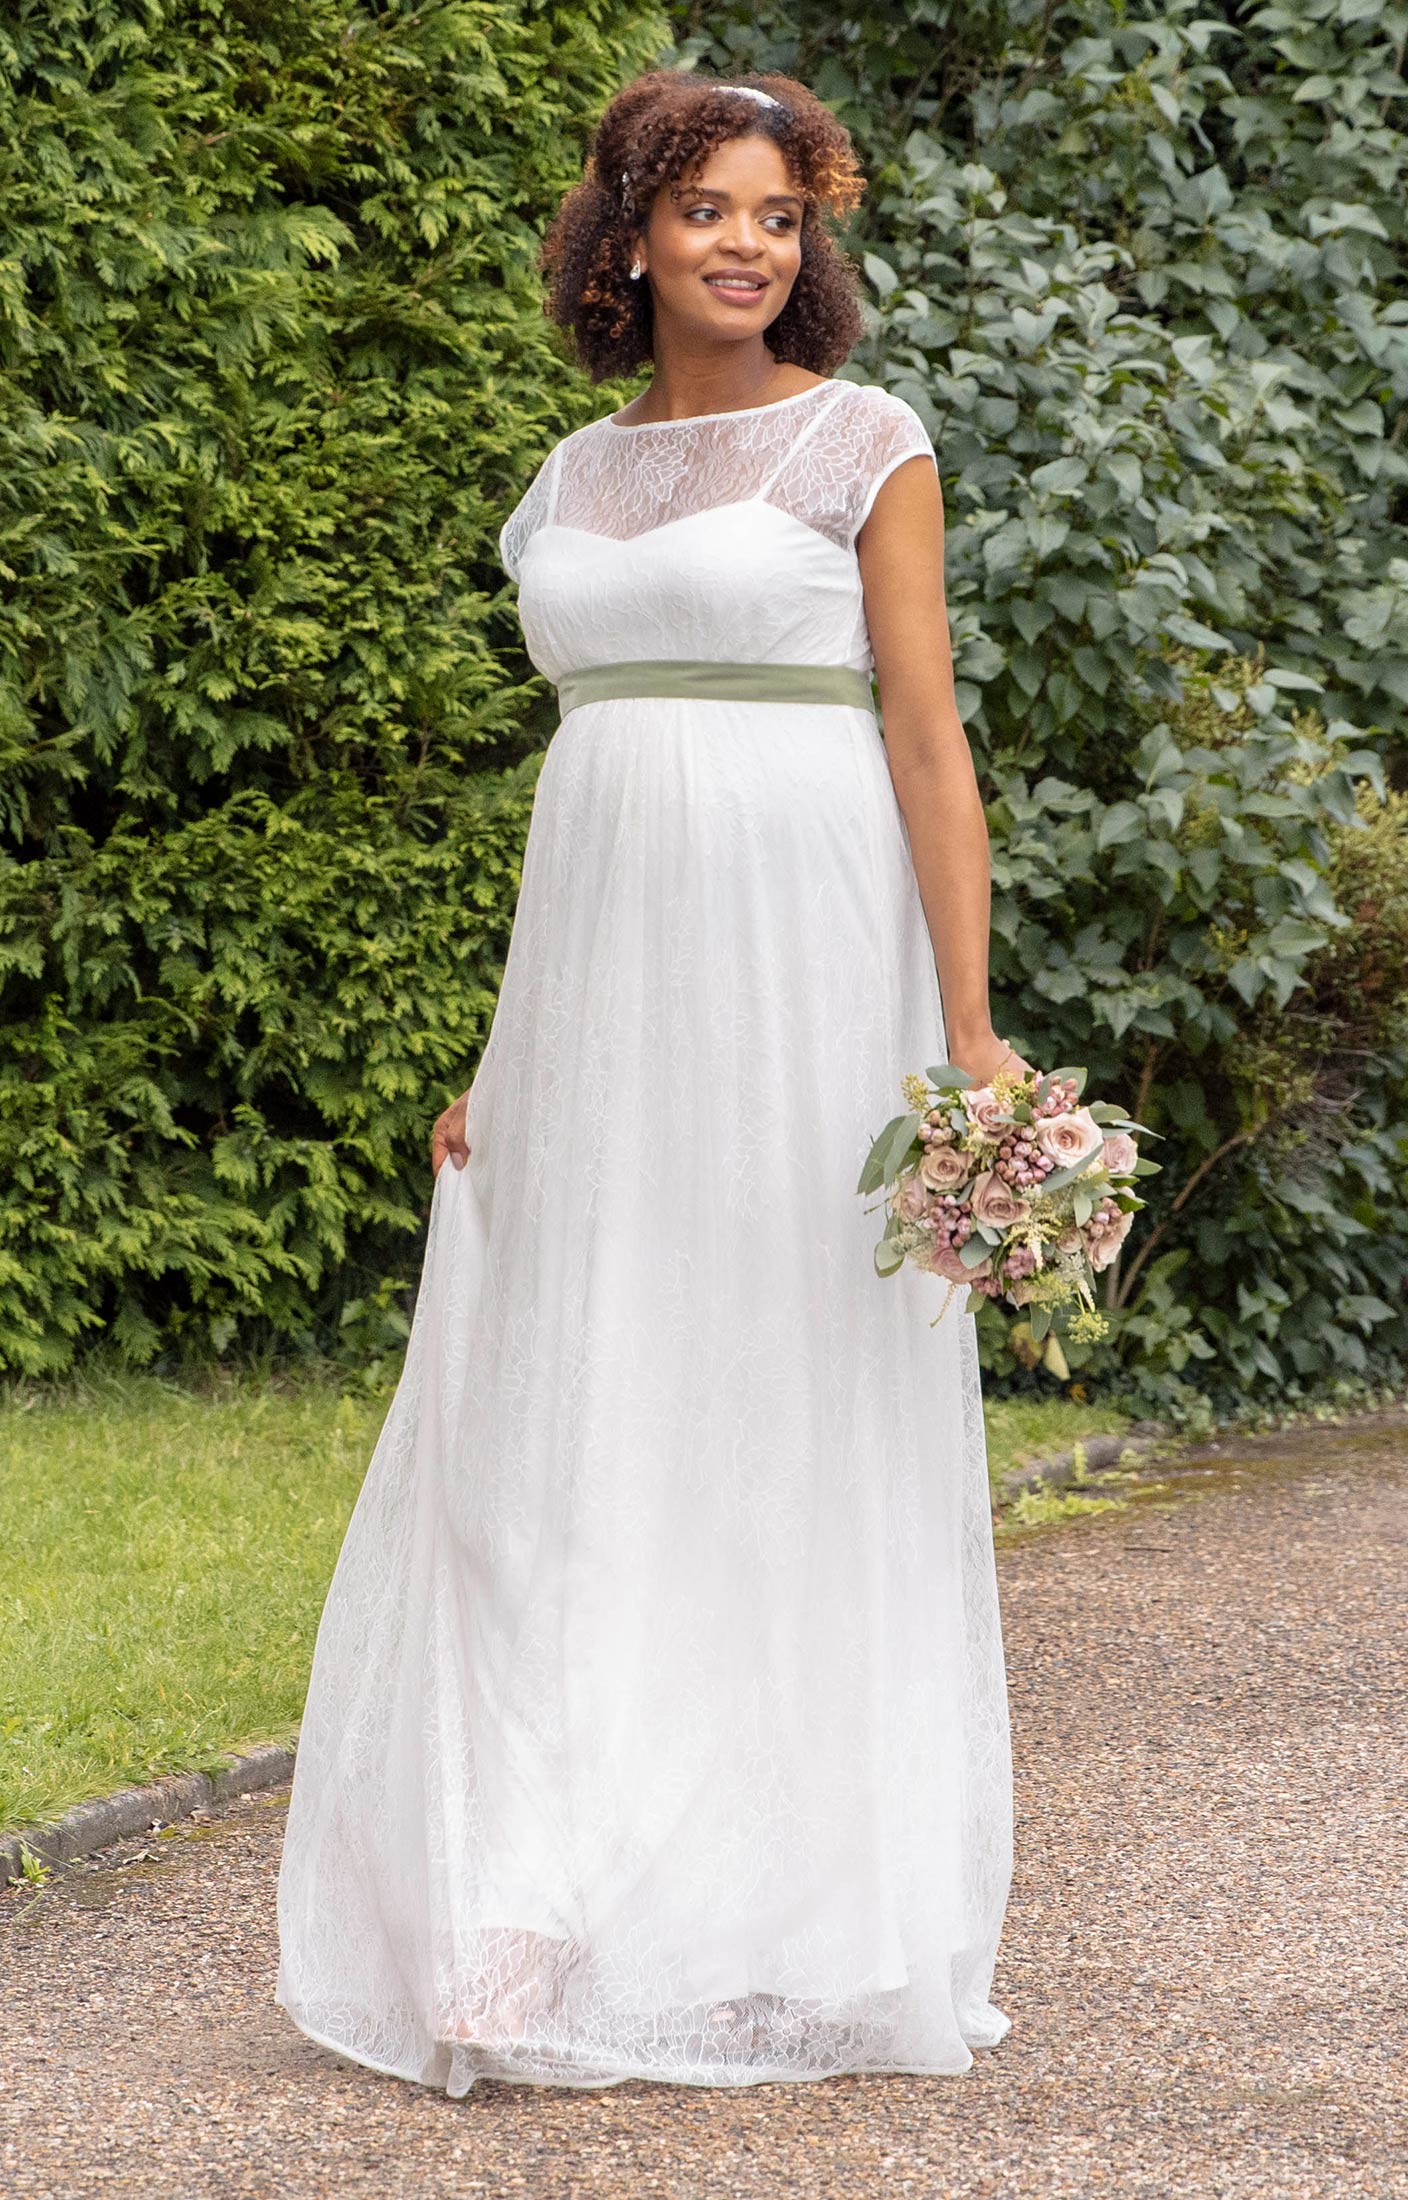 Plus-Sized White Dresses, Ivory Gowns in Plus Sizes